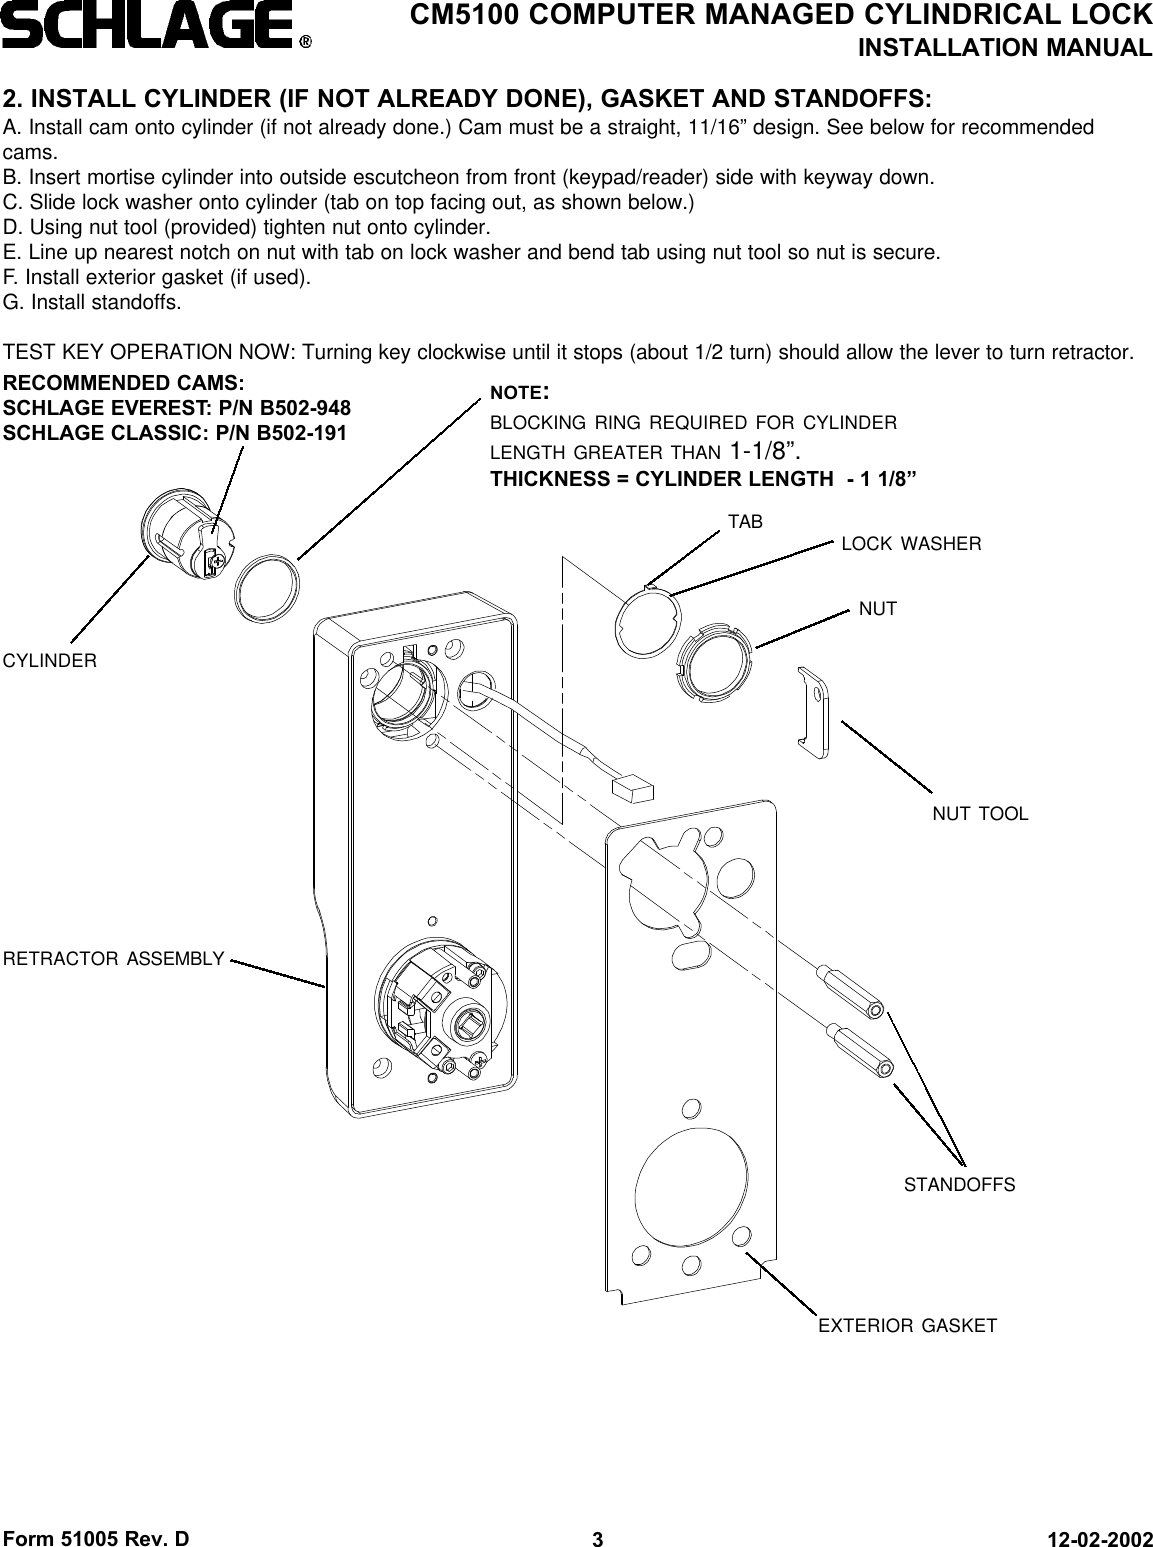 Form 51005 Rev. D 12-02-20023CM5100 COMPUTER MANAGED CYLINDRICAL LOCKINSTALLATION MANUAL2. INSTALL CYLINDER (IF NOT ALREADY DONE), GASKET AND STANDOFFS:A. Install cam onto cylinder (if not already done.) Cam must be a straight, 11/16” design. See below for recommendedcams.B. Insert mortise cylinder into outside escutcheon from front (keypad/reader) side with keyway down.C. Slide lock washer onto cylinder (tab on top facing out, as shown below.)D. Using nut tool (provided) tighten nut onto cylinder.E. Line up nearest notch on nut with tab on lock washer and bend tab using nut tool so nut is secure. F. Install exterior gasket (if used).G. Install standoffs.TEST KEY OPERATION NOW: Turning key clockwise until it stops (about 1/2 turn) should allow the lever to turn retractor.CYLINDERRECOMMENDED CAMS:SCHLAGE EVEREST: P/N B502-948SCHLAGE CLASSIC: P/N B502-191NUT TOOLRETRACTOR ASSEMBLYLOCK WASHERNUTSTANDOFFSEXTERIOR GASKETTABNOTE:BLOCKING RING REQUIRED FOR CYLINDERLENGTH GREATER THAN 1-1/8”.THICKNESS = CYLINDER LENGTH  - 1 1/8”